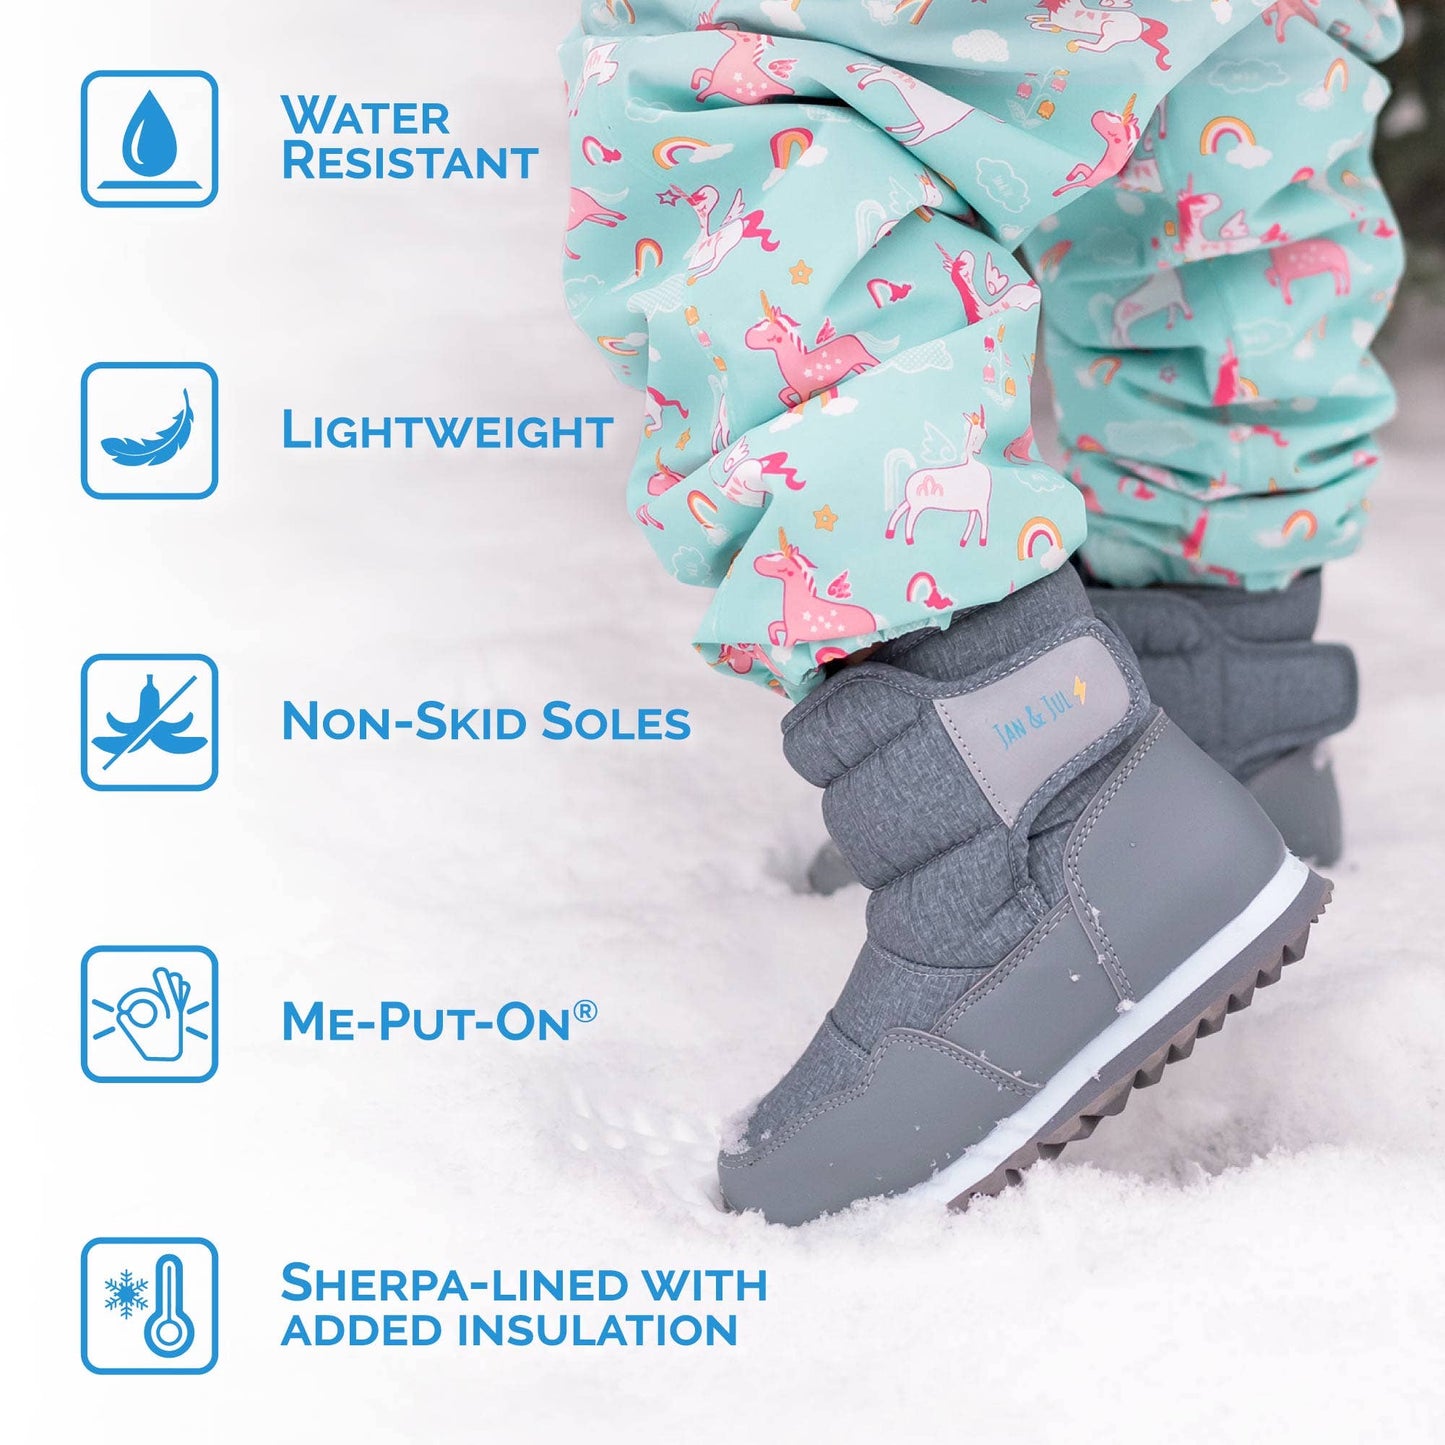 Watermelon Pink | Toasty-Dry Tall Puffy Winter Boots